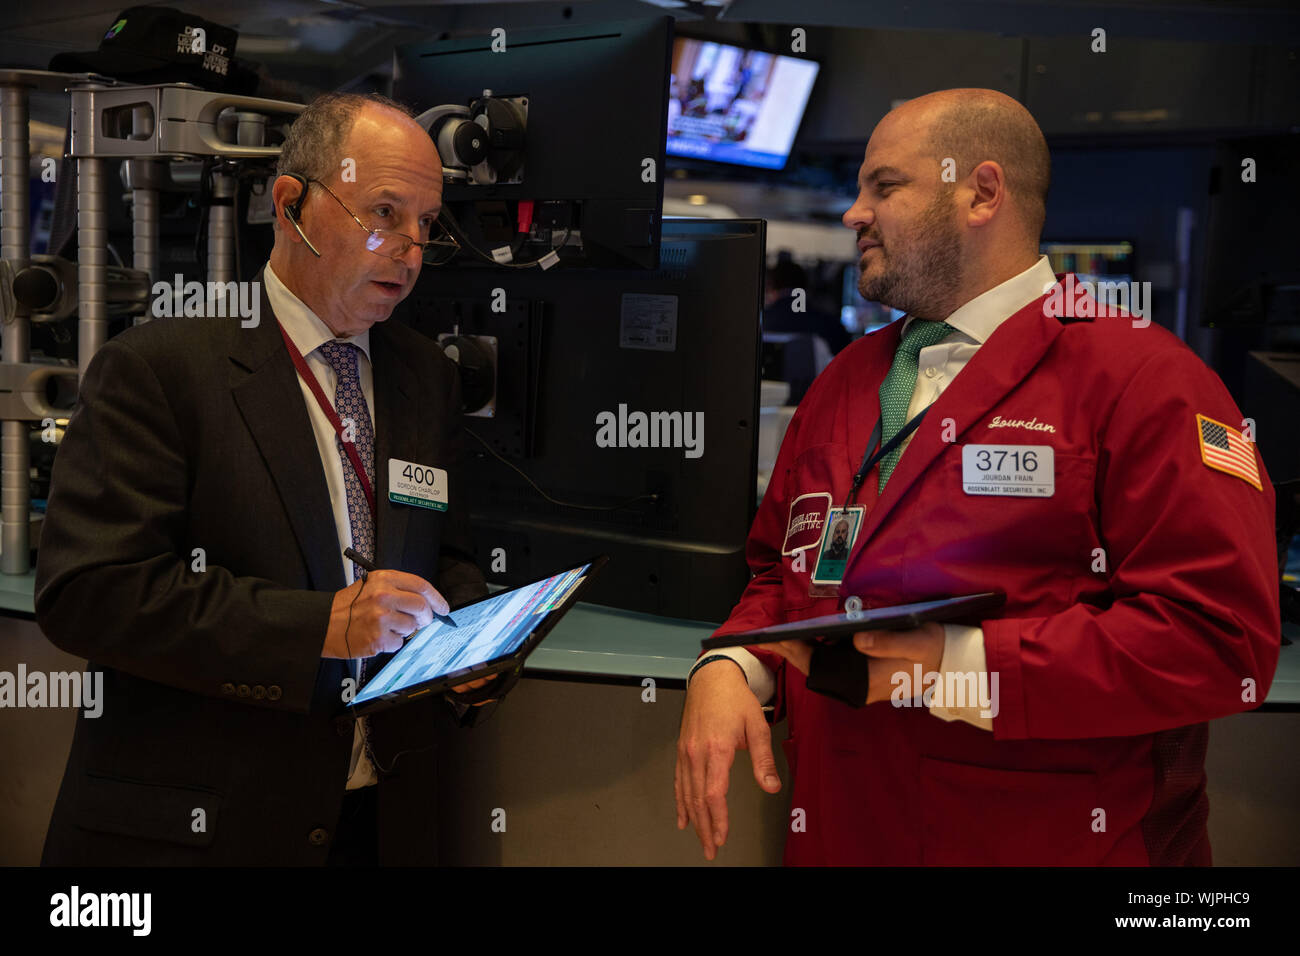 New York, USA. 3rd Sep, 2019. Traders work at the New York Stock Exchange in New York, the United States, on Sept. 3, 2019. U.S. stocks closed lower on Tuesday. The Dow Jones Industrial Average fell 285.26 points, or 1.08 percent, to 26,118.02. The S&P 500 was down 20.19 points, or 0.69 percent, to 2,906.27. The Nasdaq Composite Index fell 88.72 points, or 1.11 percent, to 7,874.16. Credit: Guo Peiran/Xinhua/Alamy Live News Stock Photo